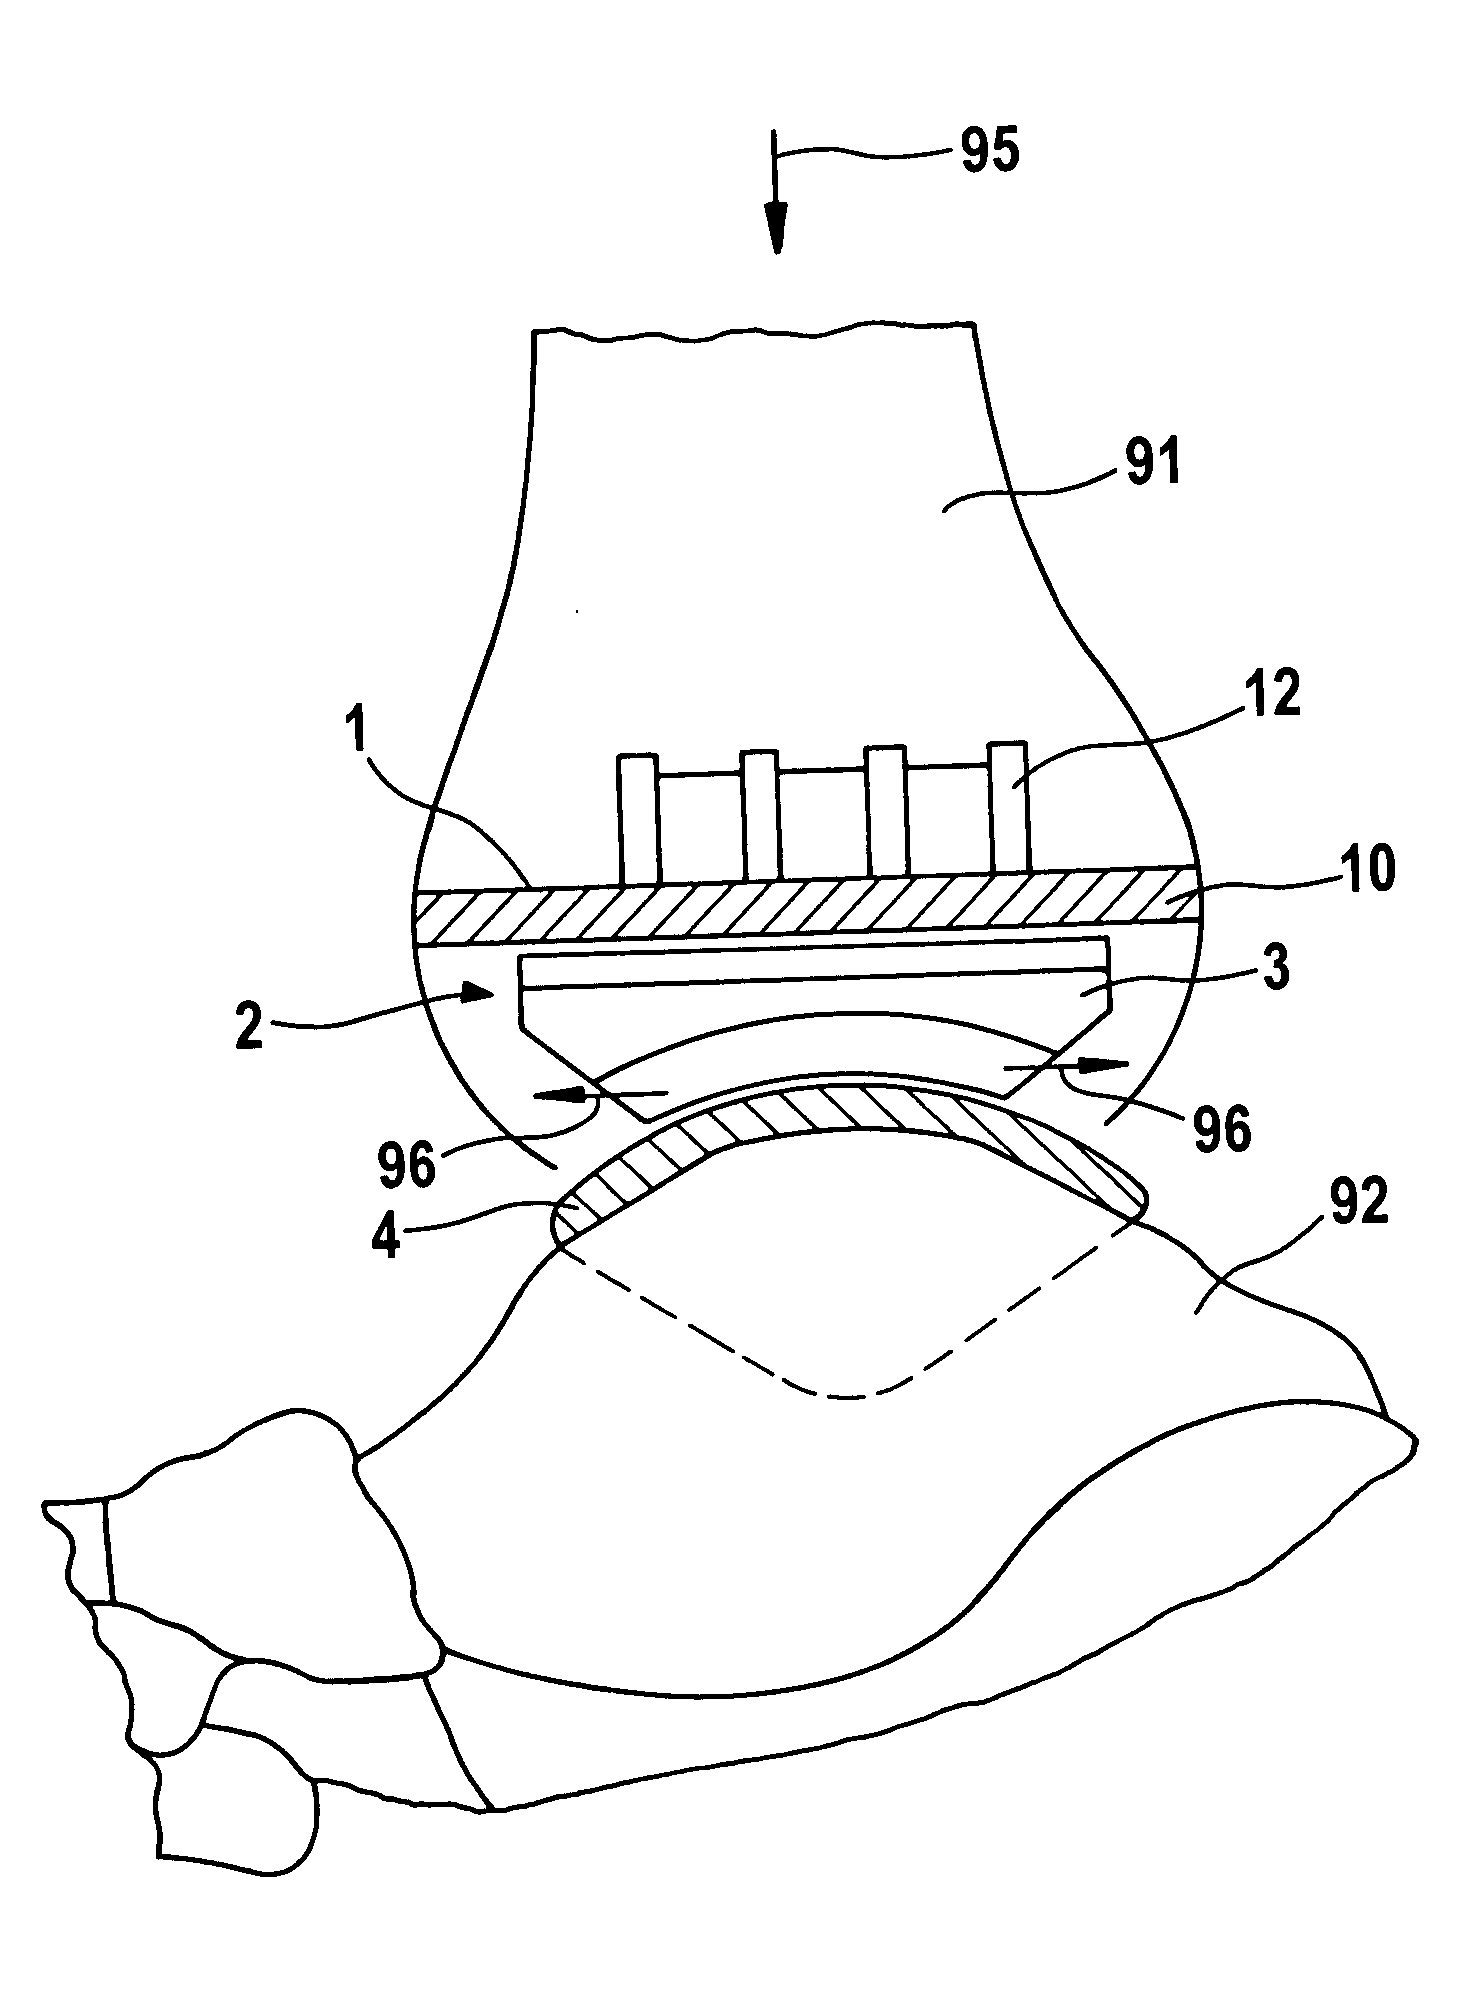 Endoprosthesis with intermediate part